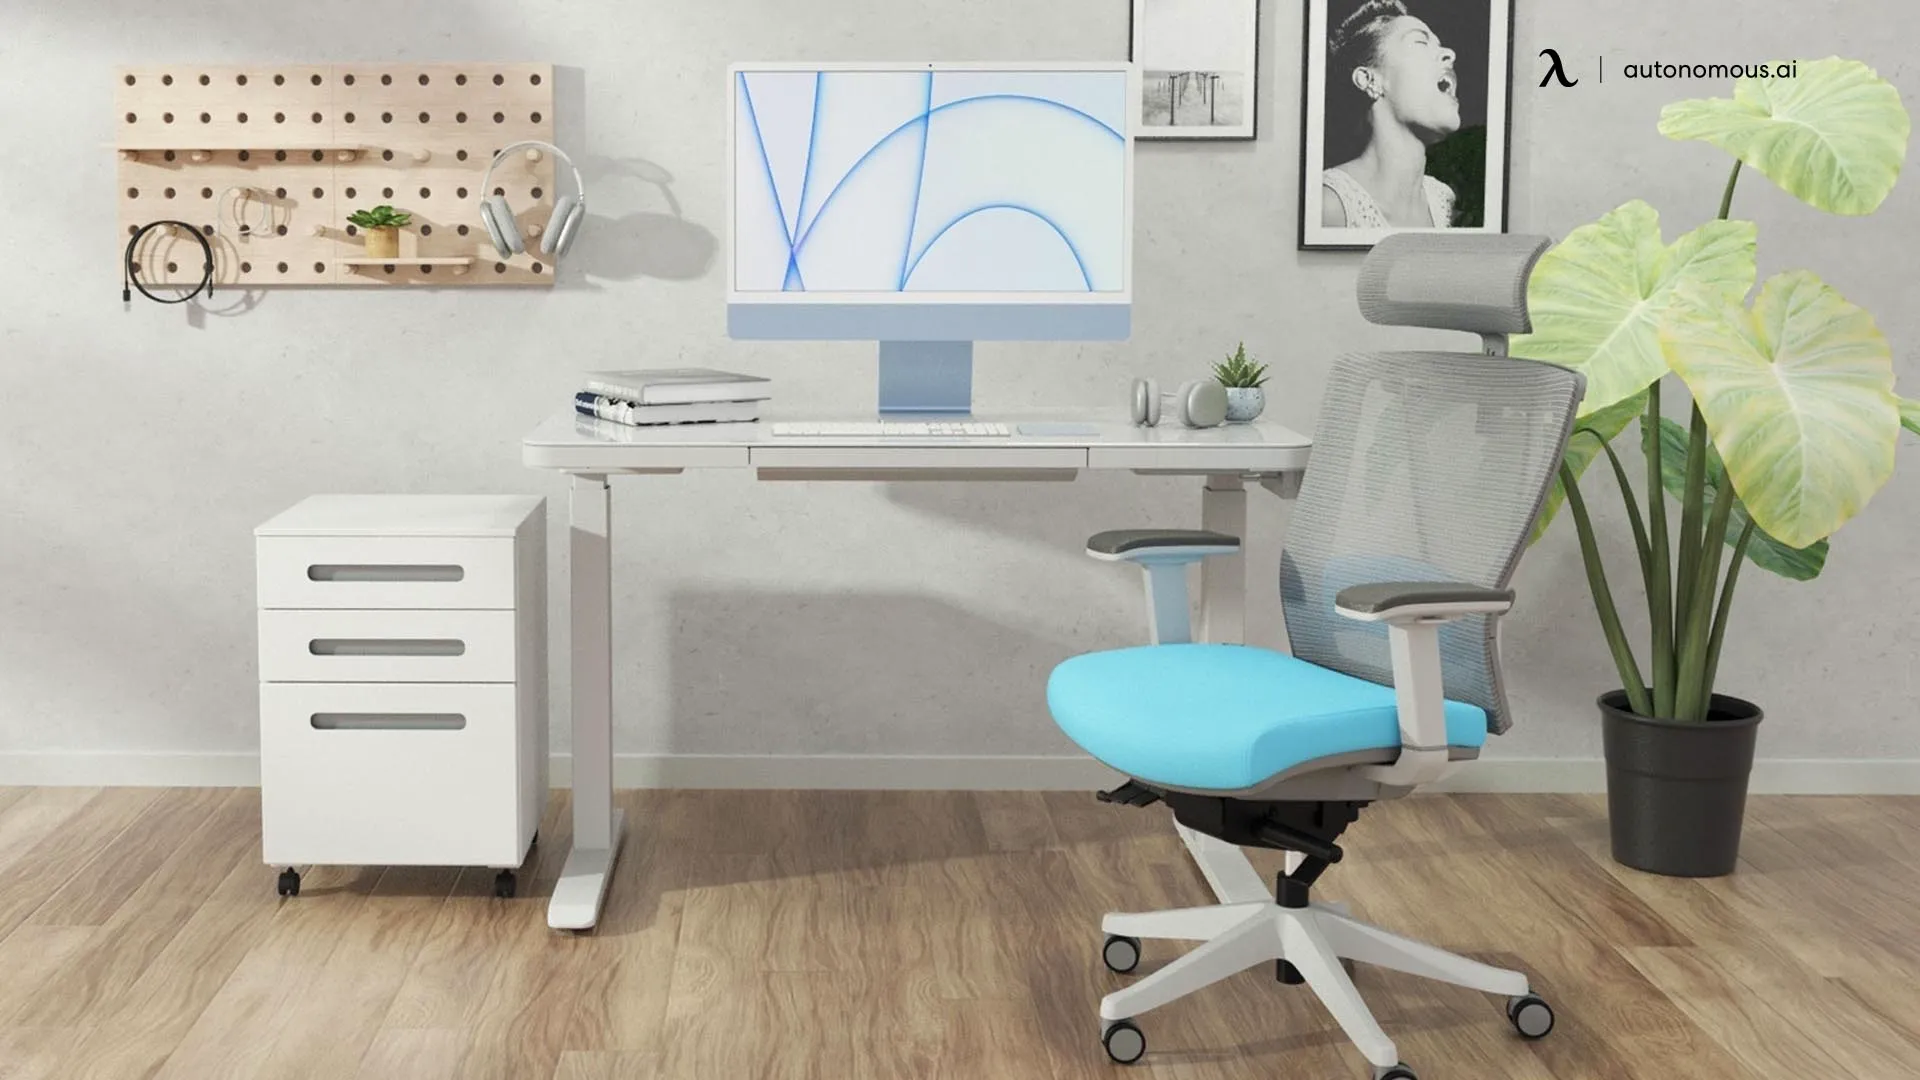 Compact Desk by Wistopht small bedroom desk